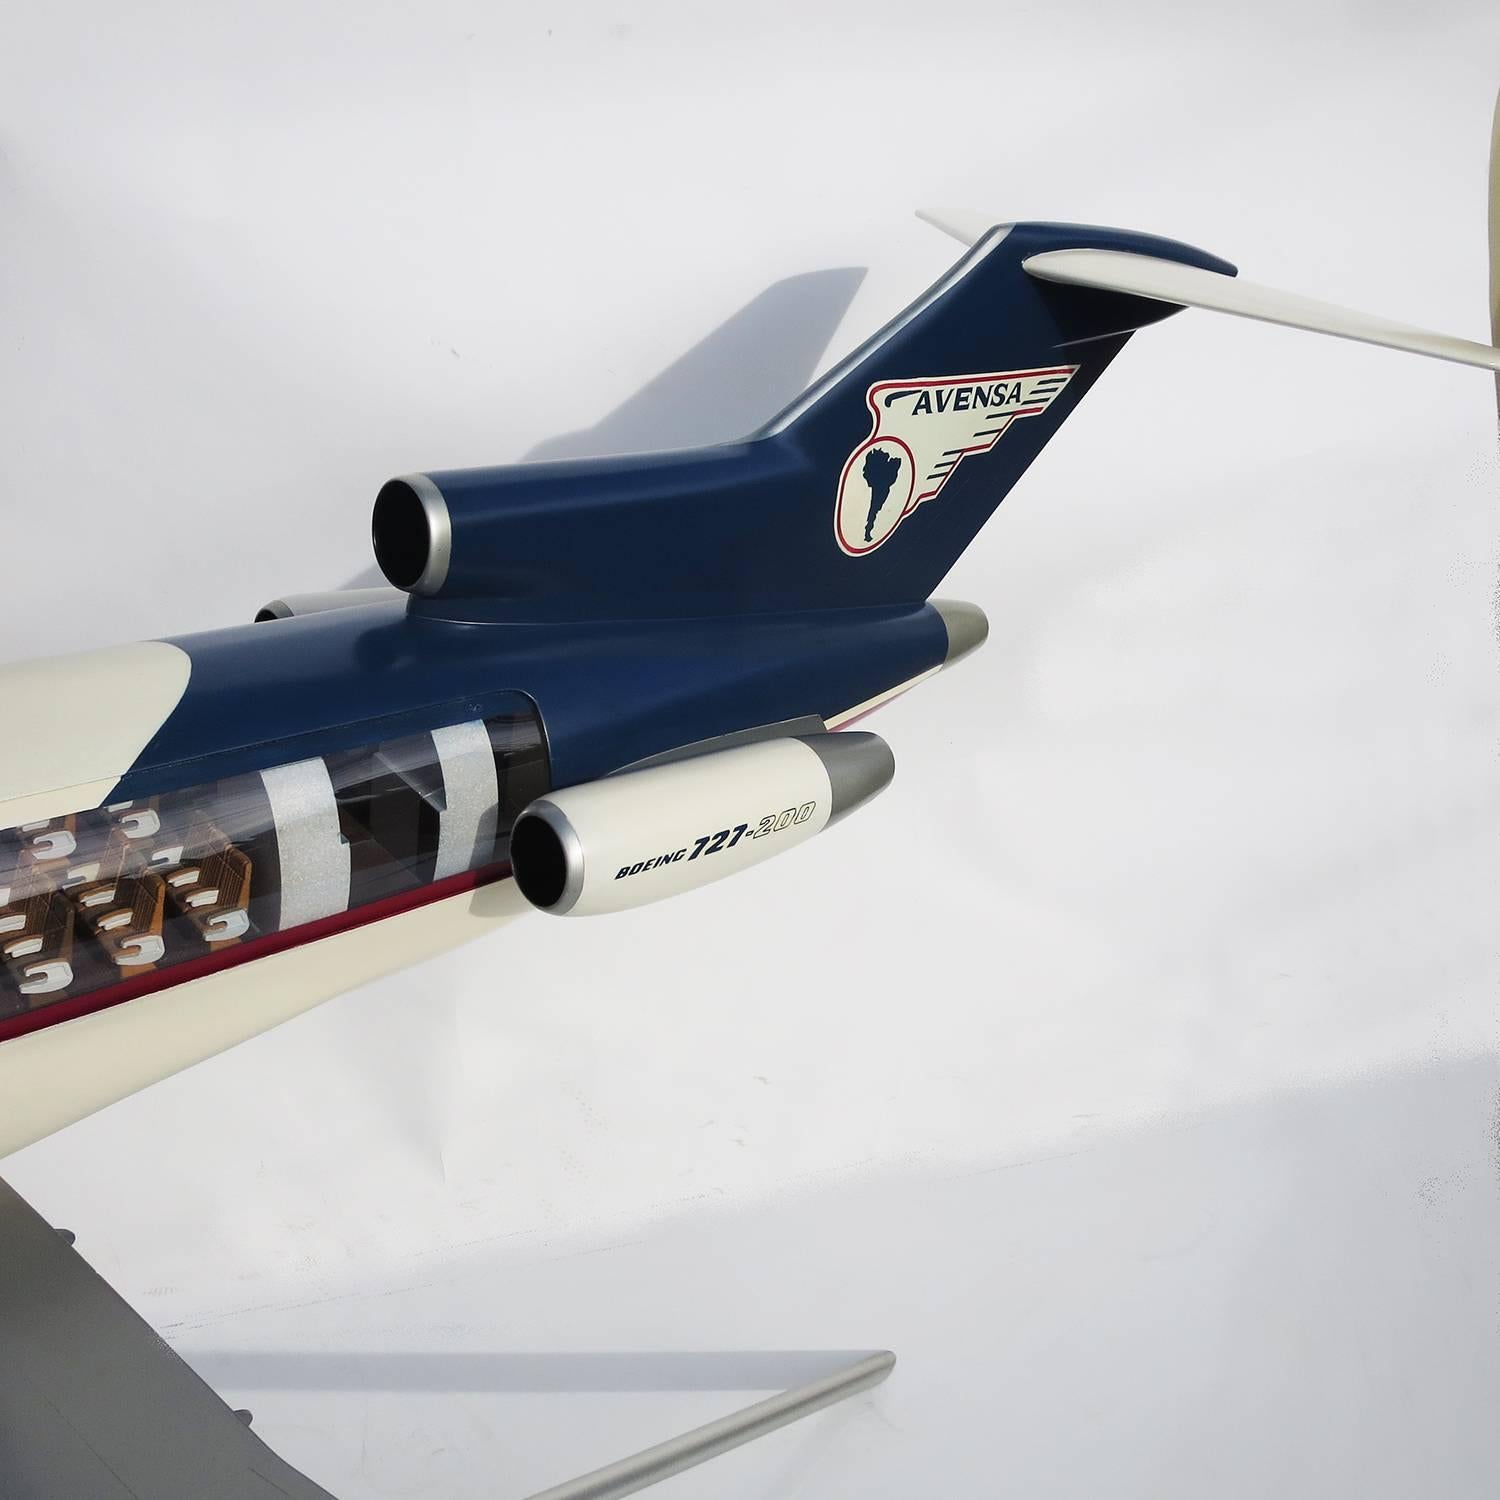 American Massive Boeing 727 Cutaway Jet Model for Avensa Airlines